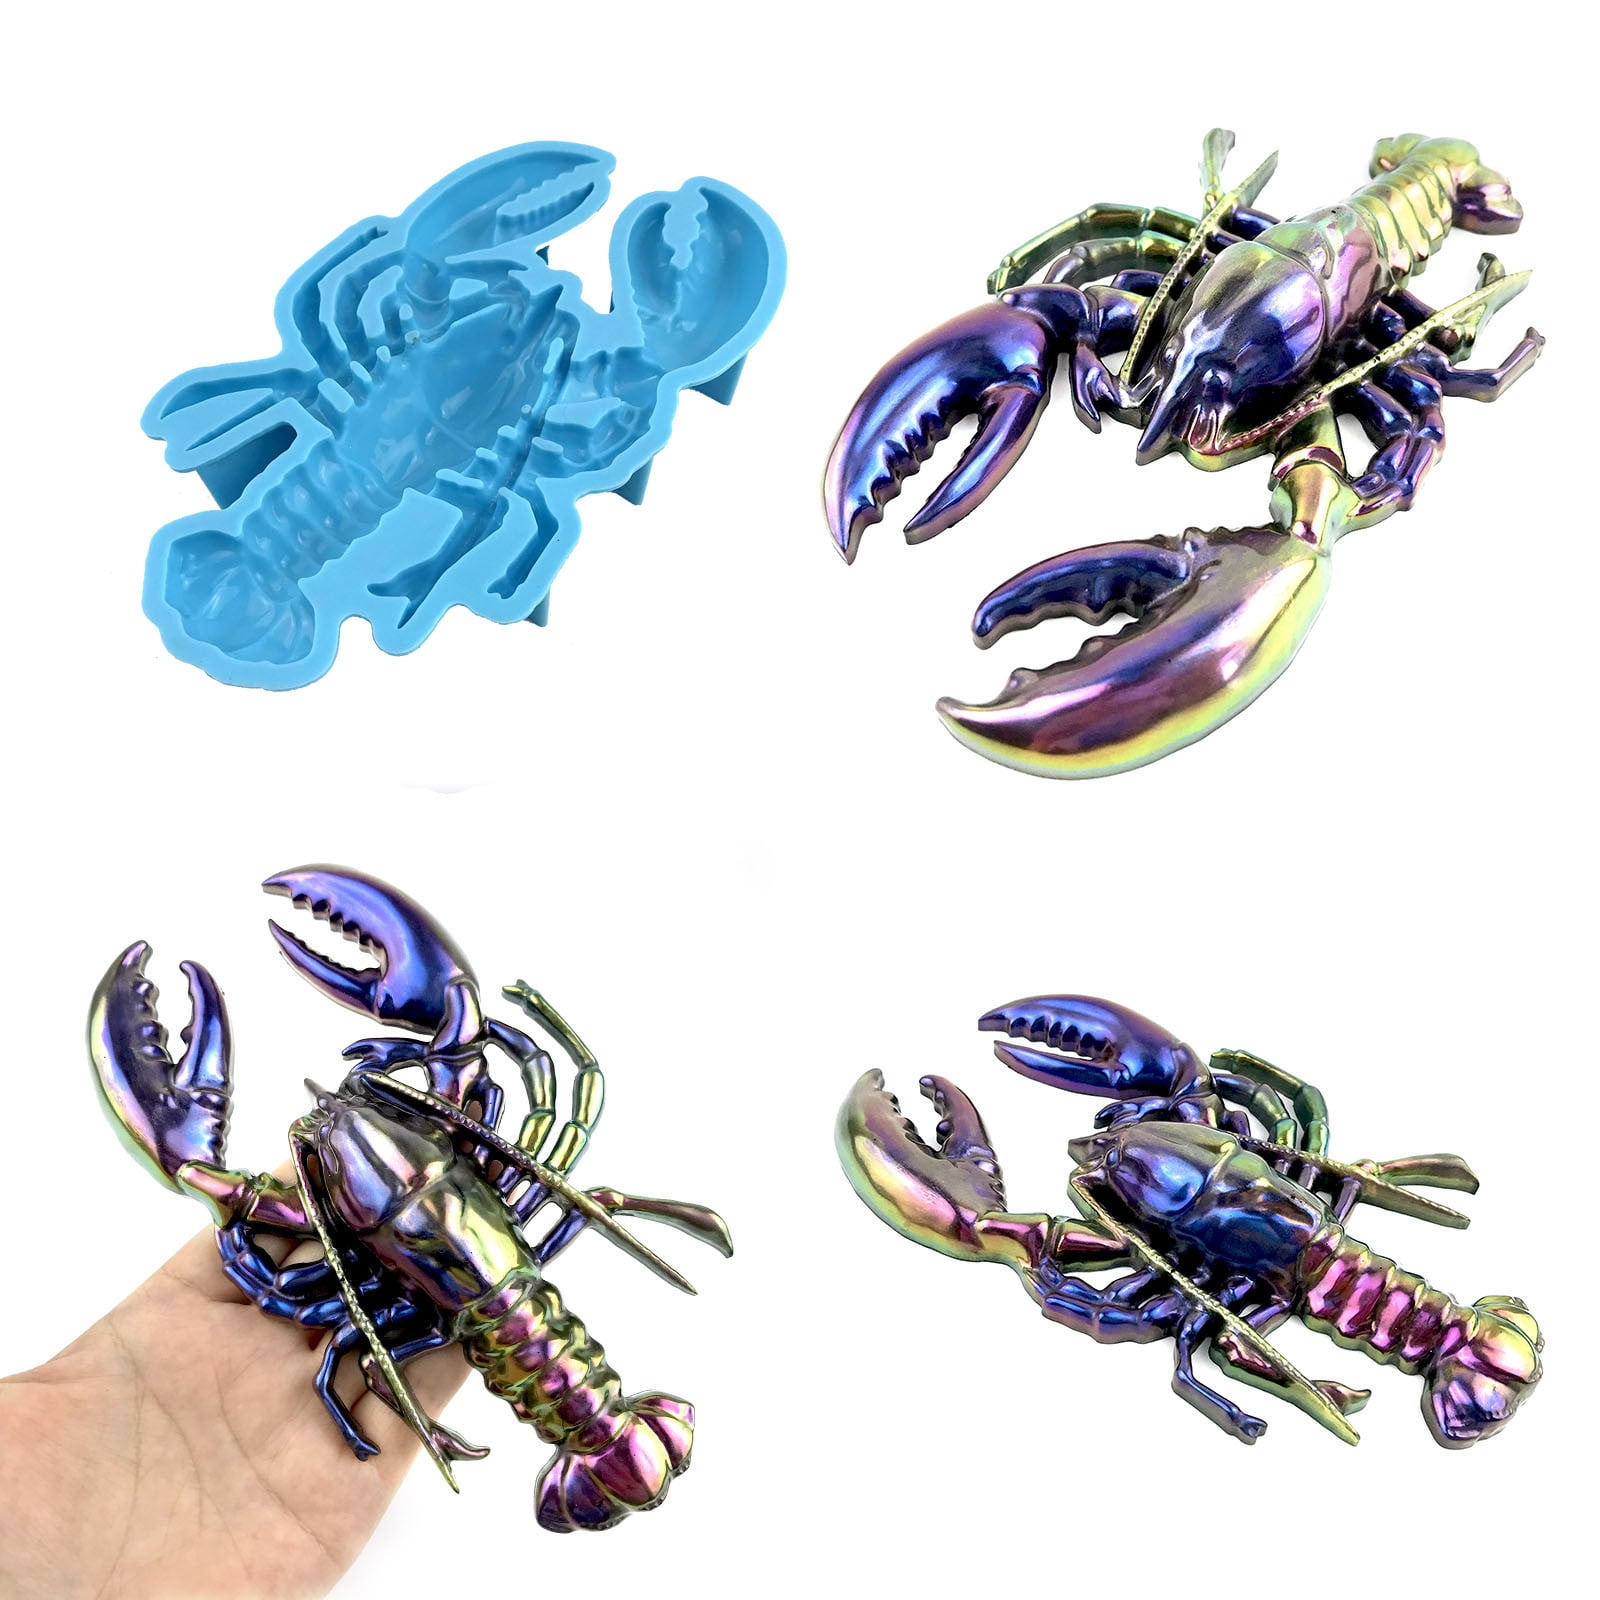 Gbsell Candy Molds Clearance Semi Stereoscopic Plastic Dripping Mould for Lobster Pendant DIY Crawfish Wall Decoration Pendant Table Decoration Silicone